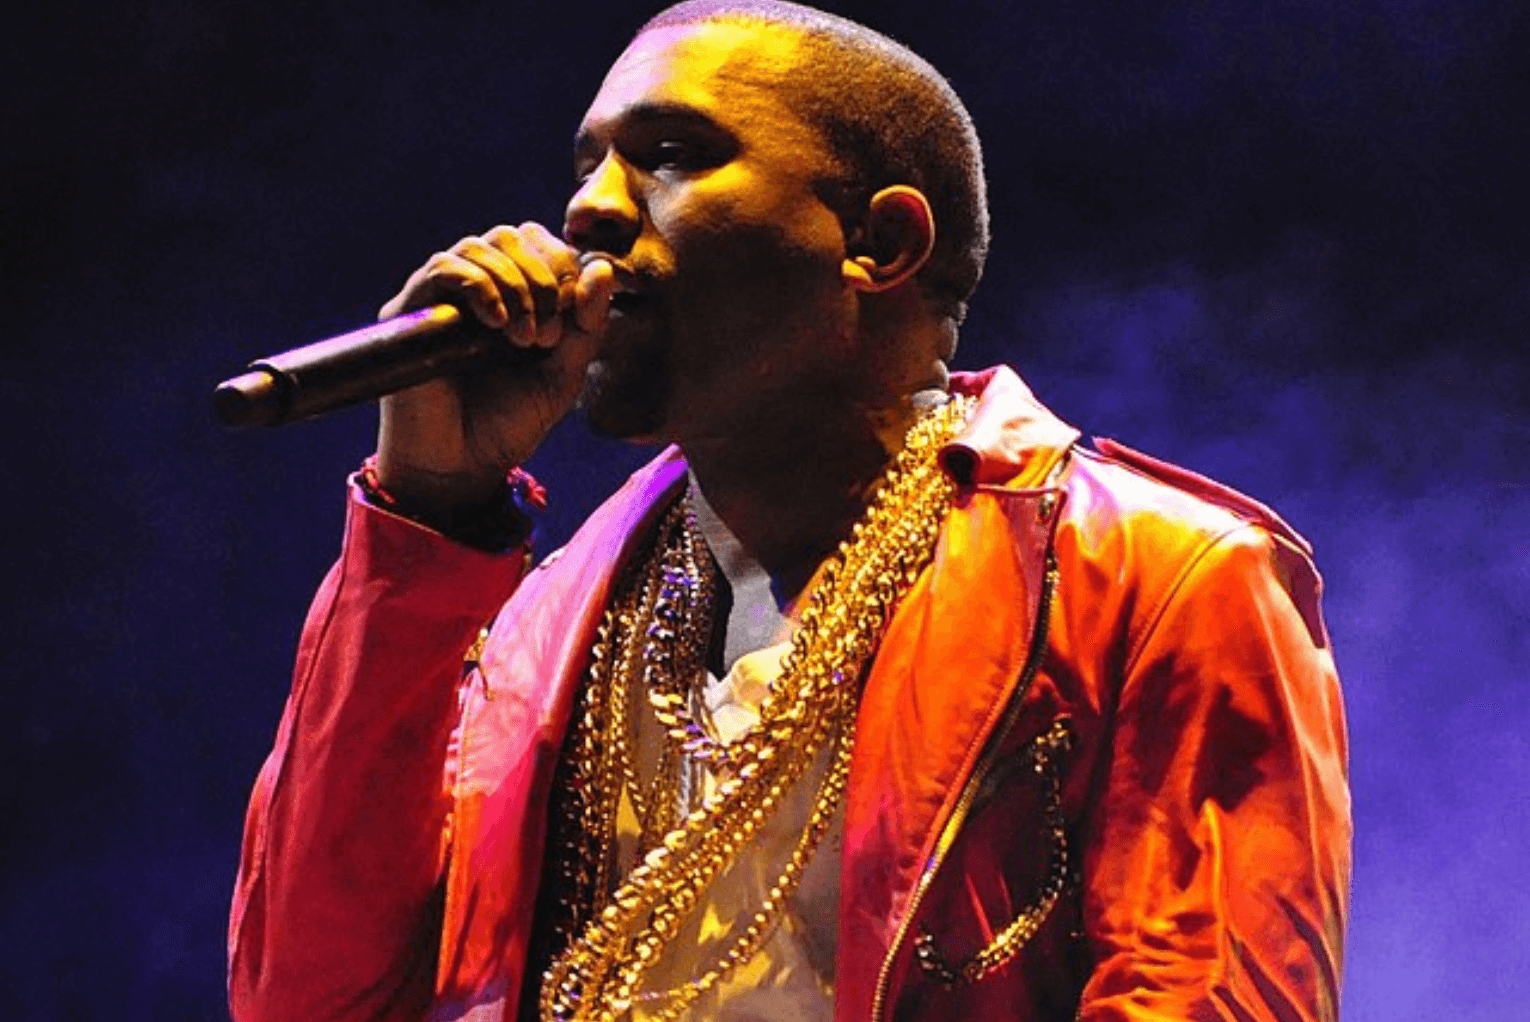 Kanye West Goes into Adult Entertainment After Leaving Faith